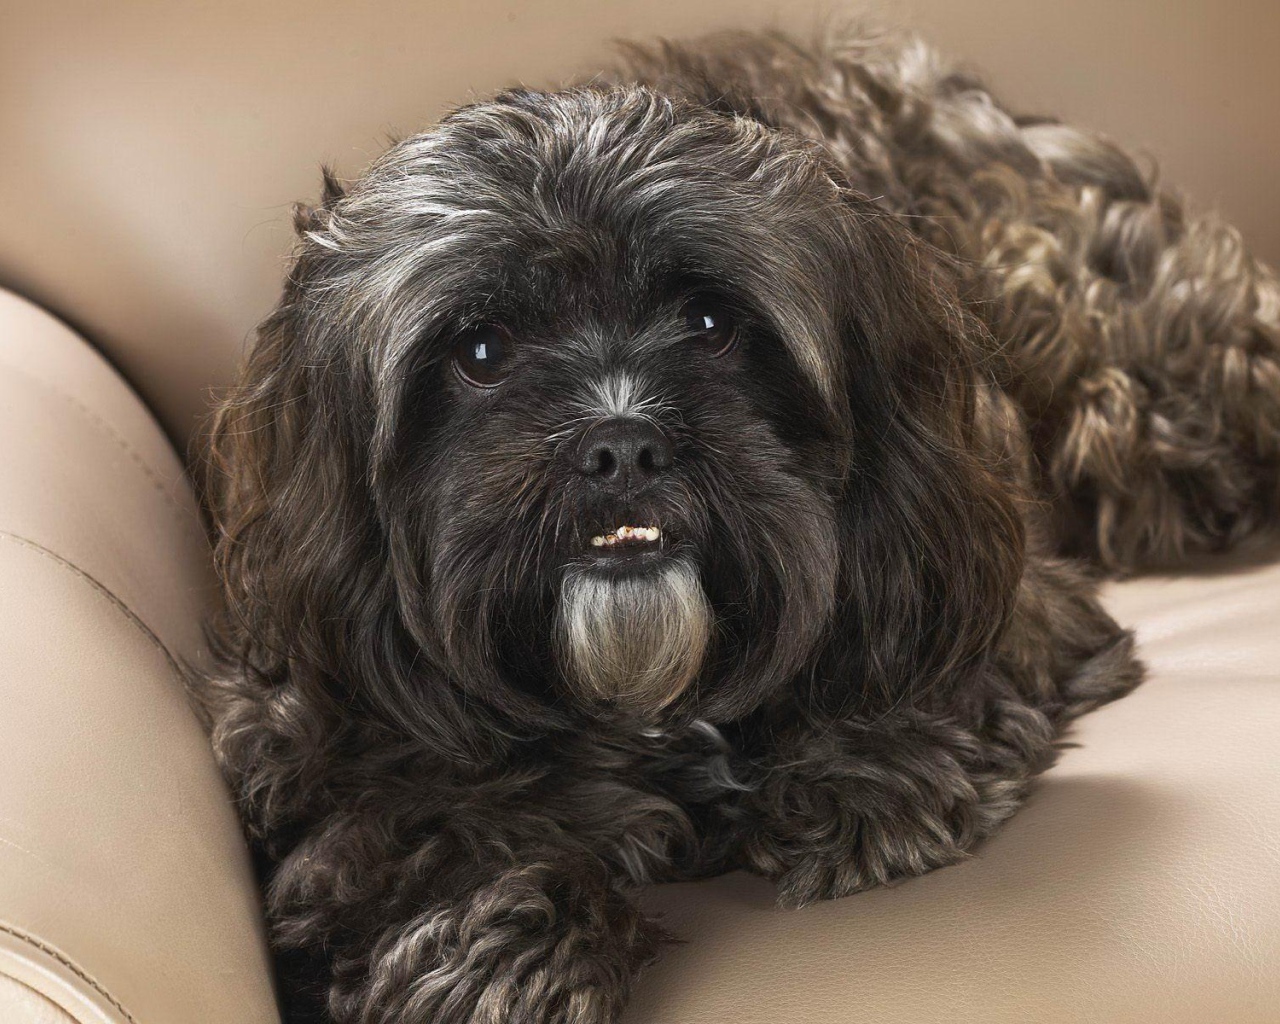 Black shih tzu on the couch